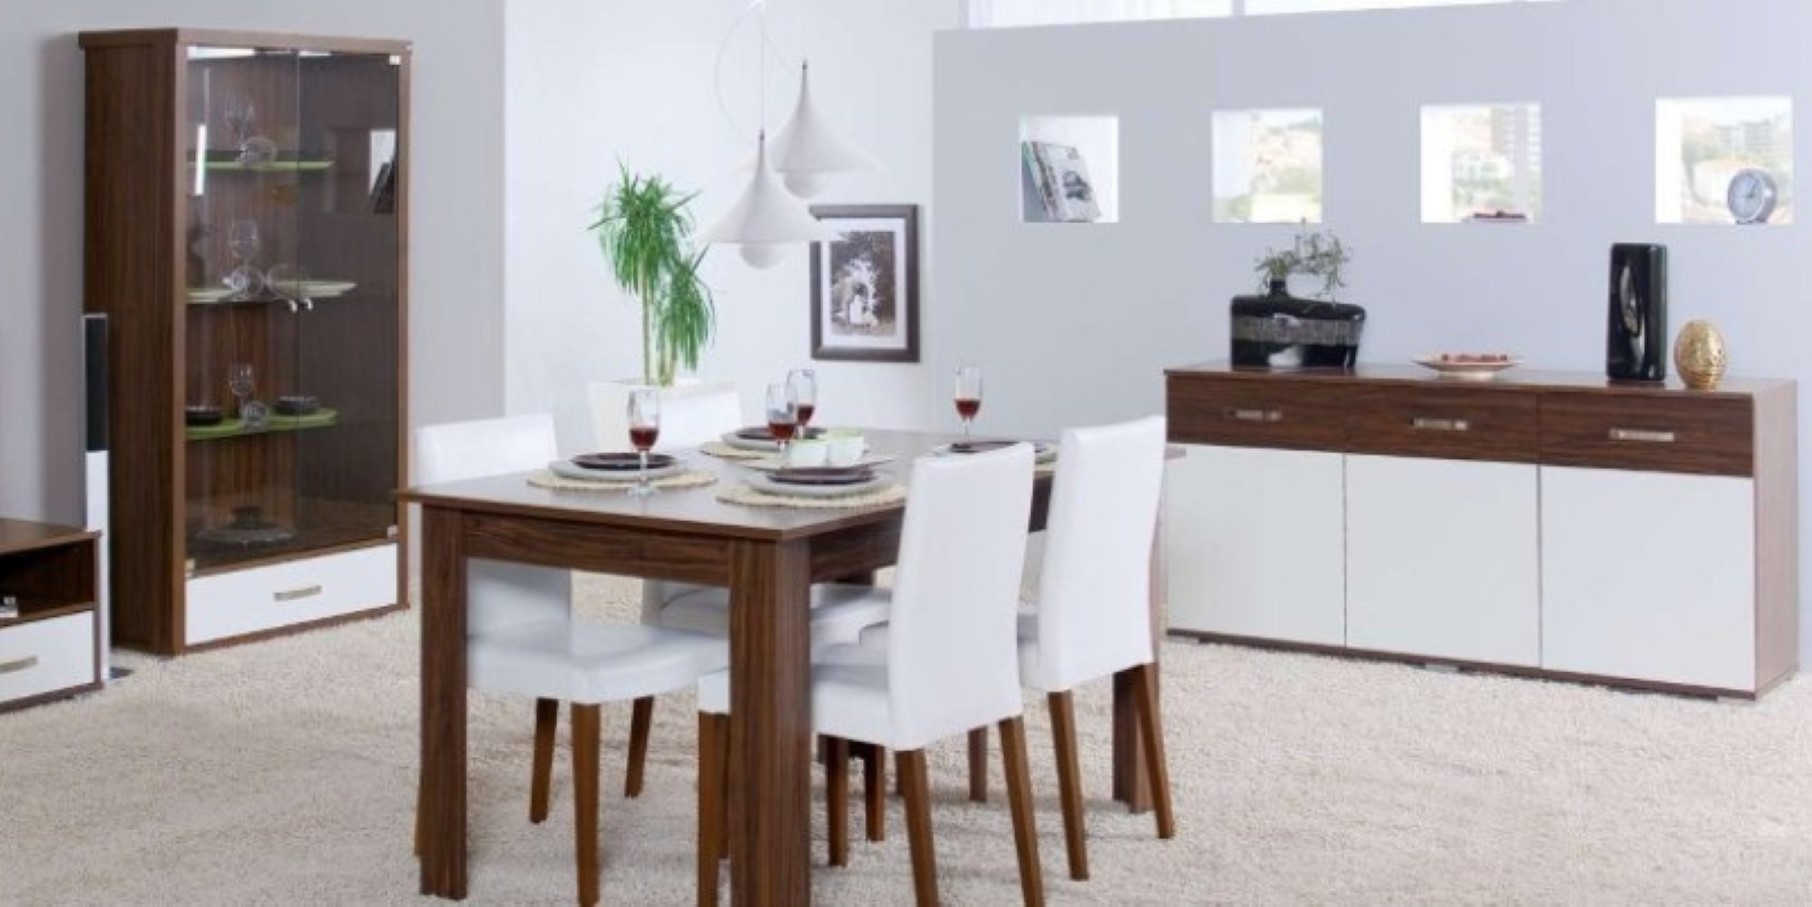 Sideboard Design Table Modern Sideboard Design Feat Rectangular Table And Elegant White Leather Dining Chairs With Wooden Legs Dining Room  White Leather Dining Chairs Inducing Beauty As Well As Elegance 